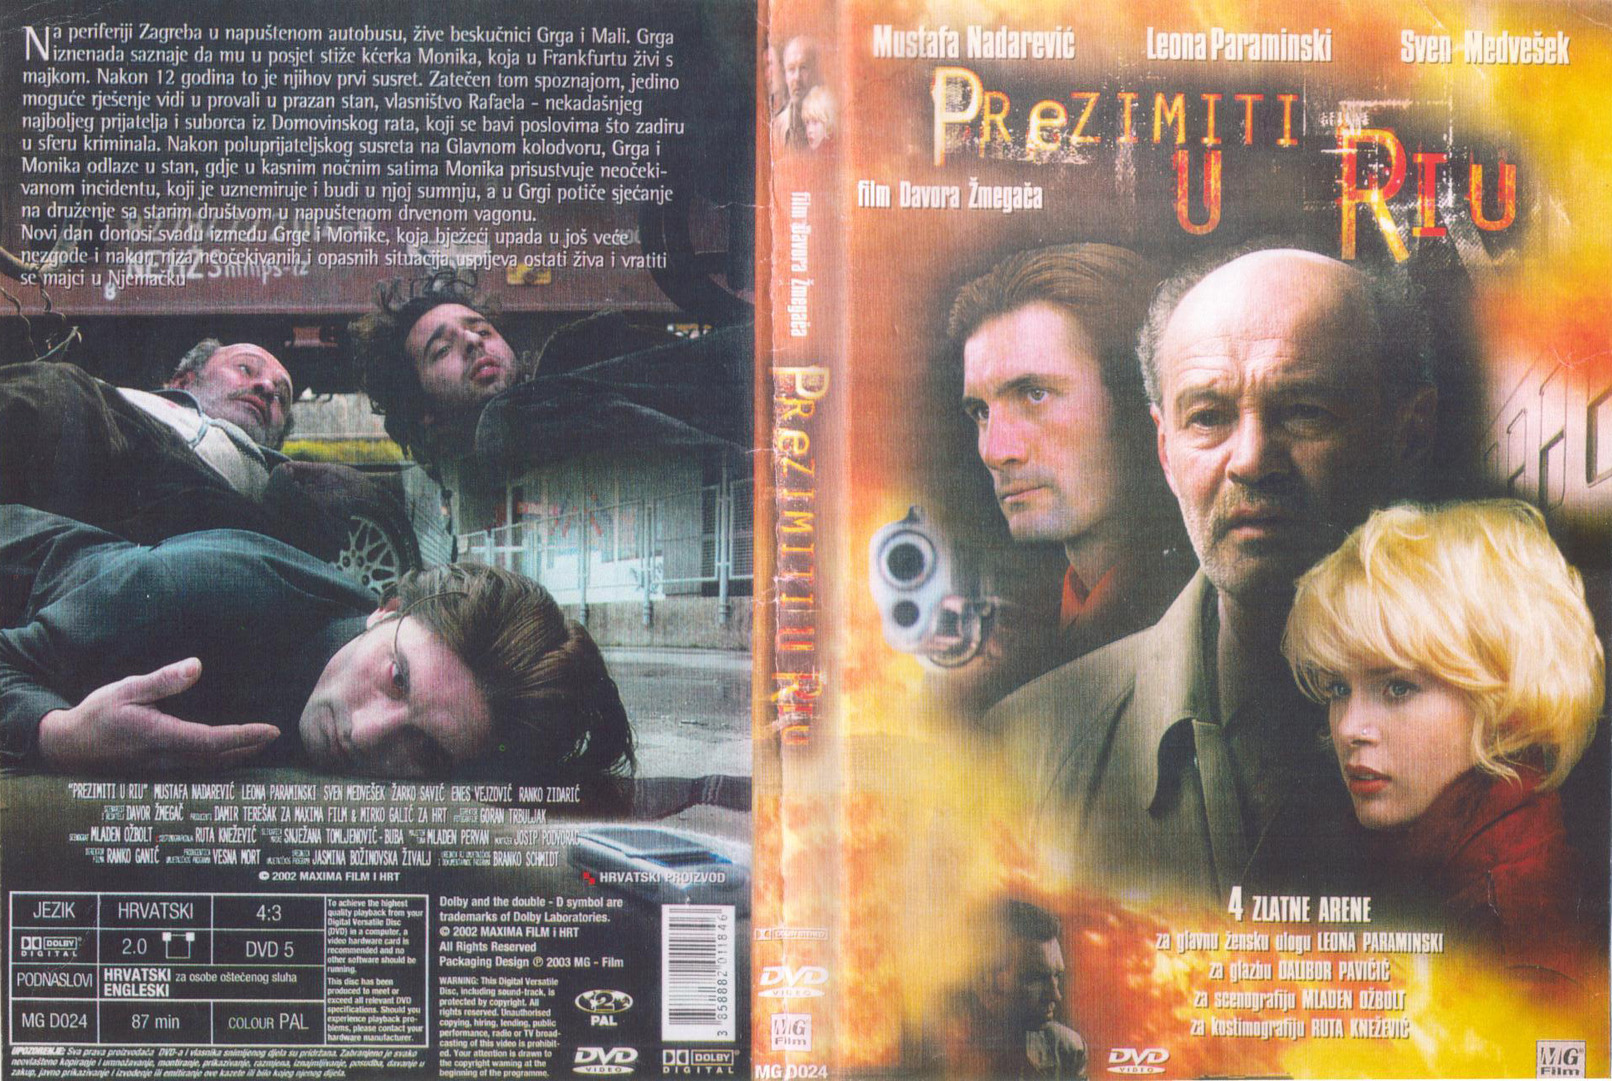 Click to view full size image -  DVD Cover - P - prezimiti_u_riu_dvd - prezimiti_u_riu_dvd.jpg